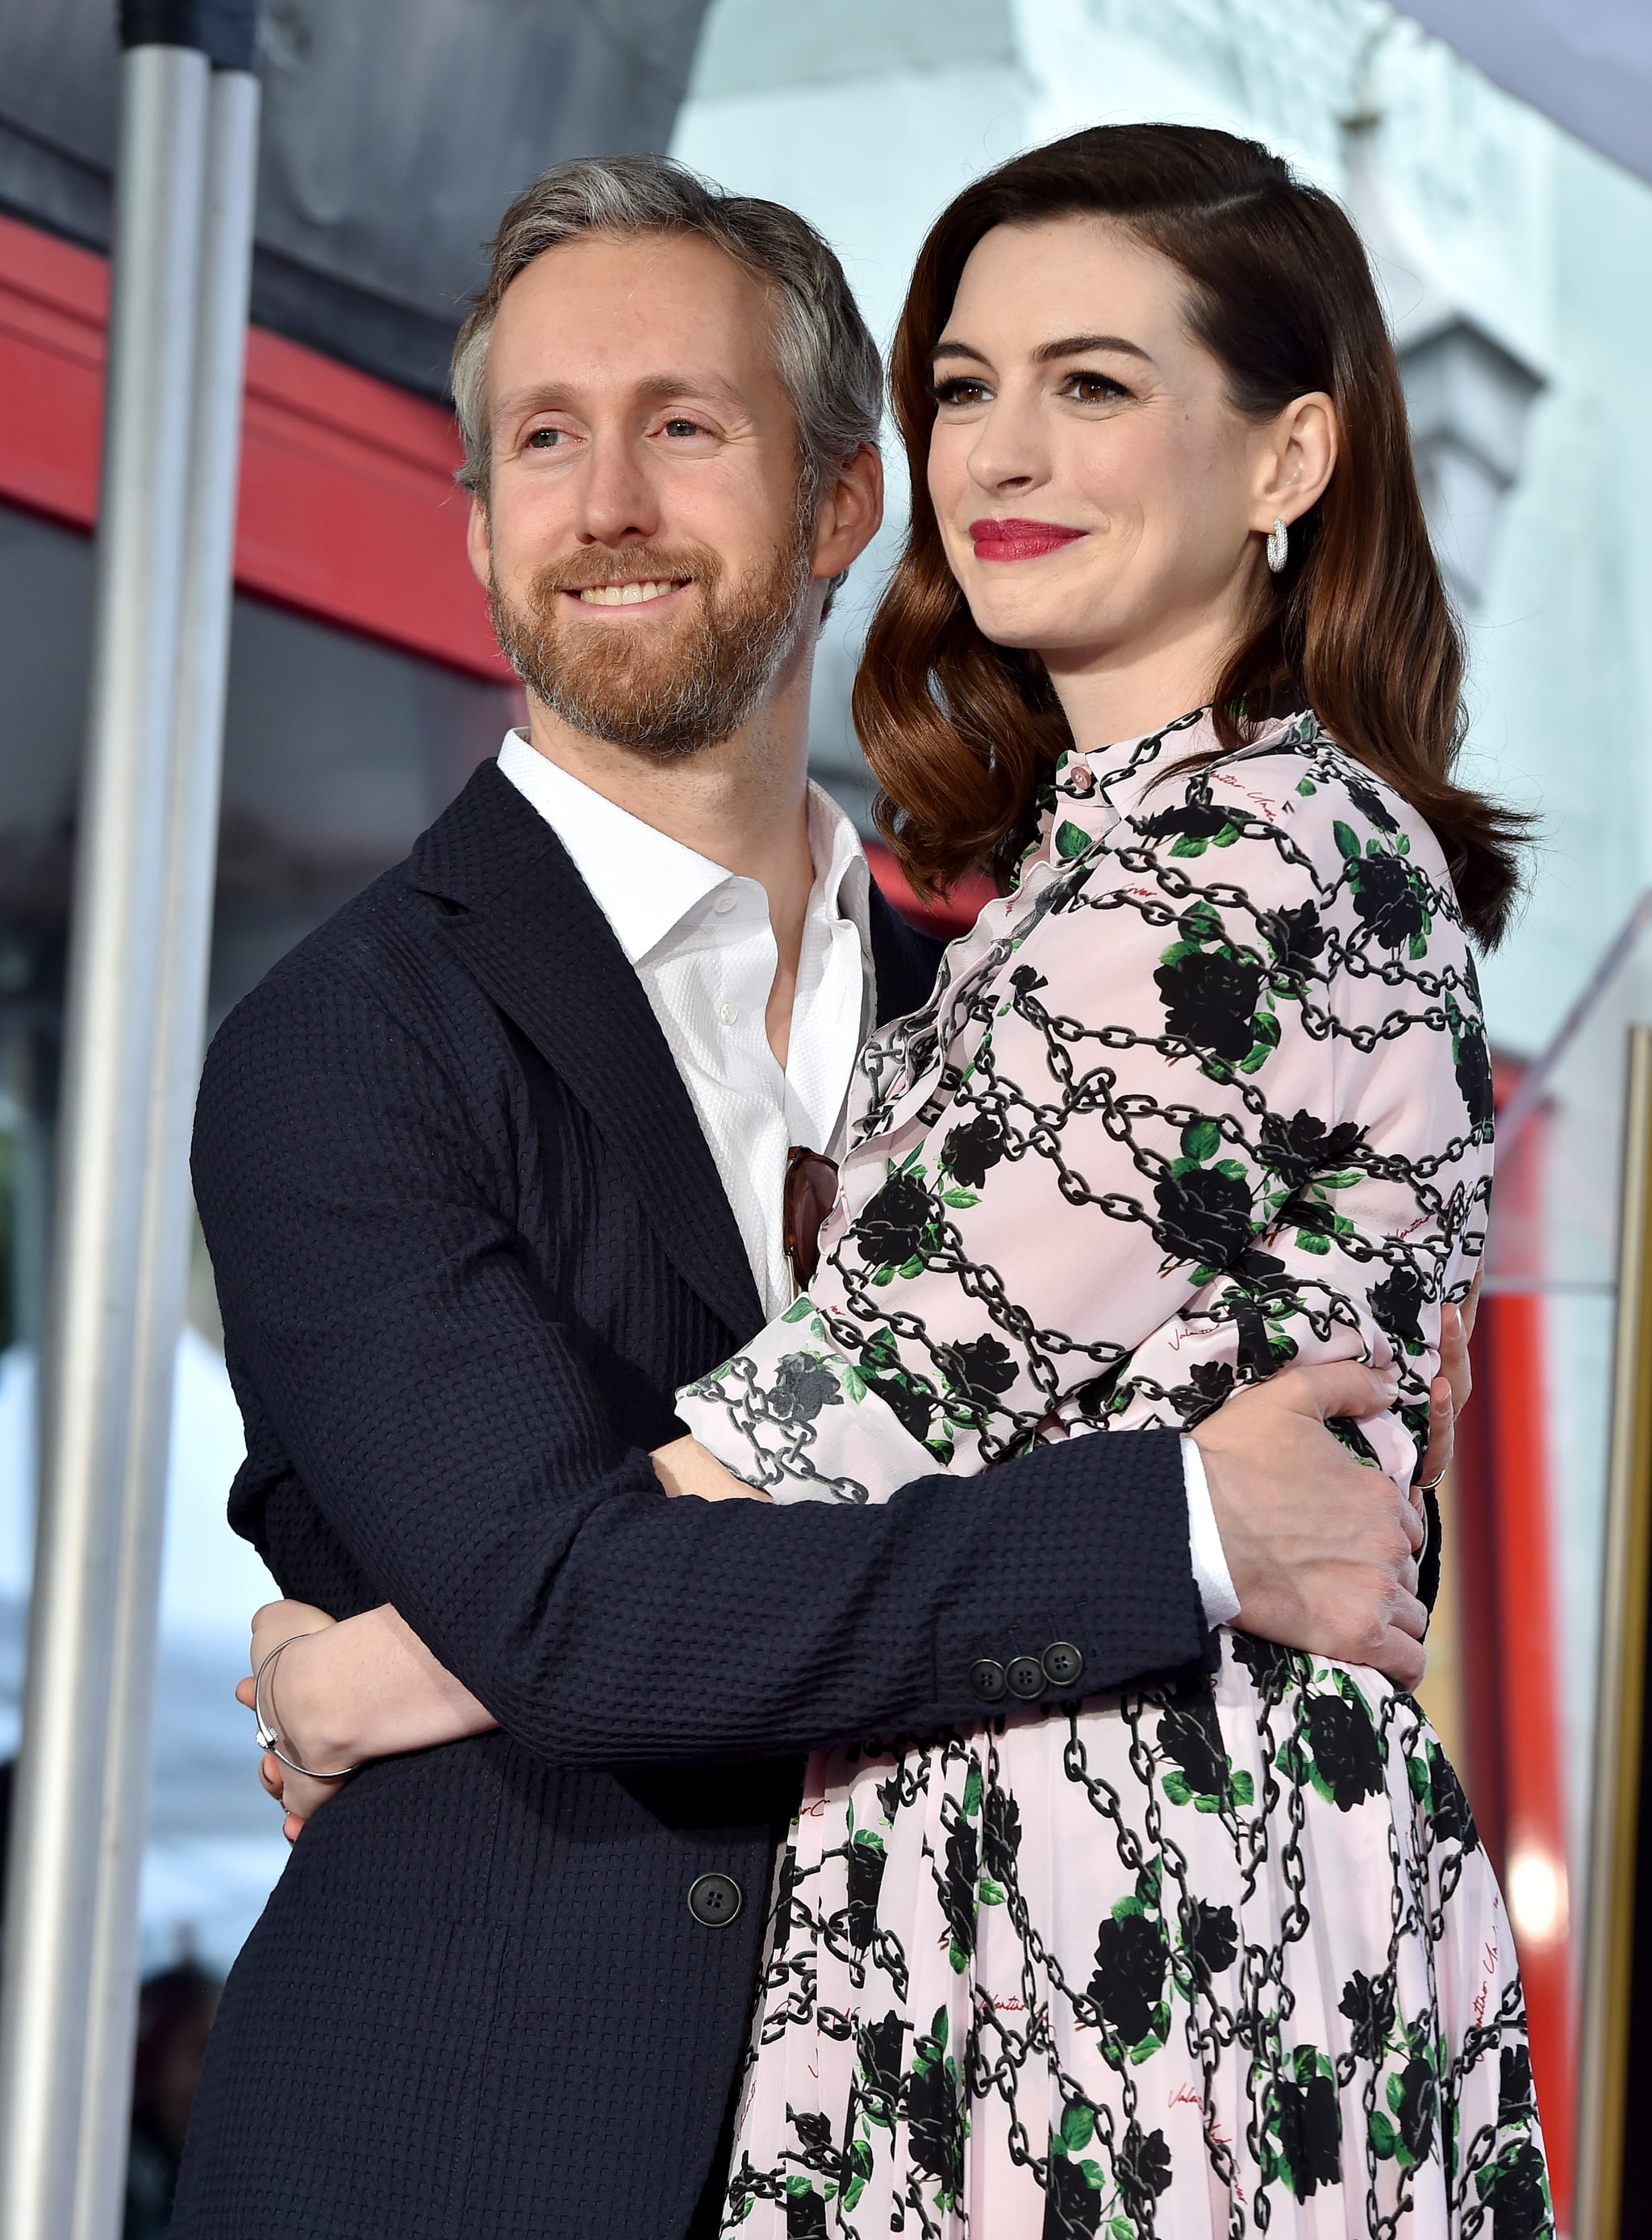 HOLLYWOOD, CALIFORNIA - MAY 09: Anne Hathaway and Adam Shulman attend the ceremony honouring Anne Hathaway with star on the Hollywood Walk of Fame on May 09, 2019 in Hollywood, California. (Photo by Axelle/Bauer-Griffin/FilmMagic)